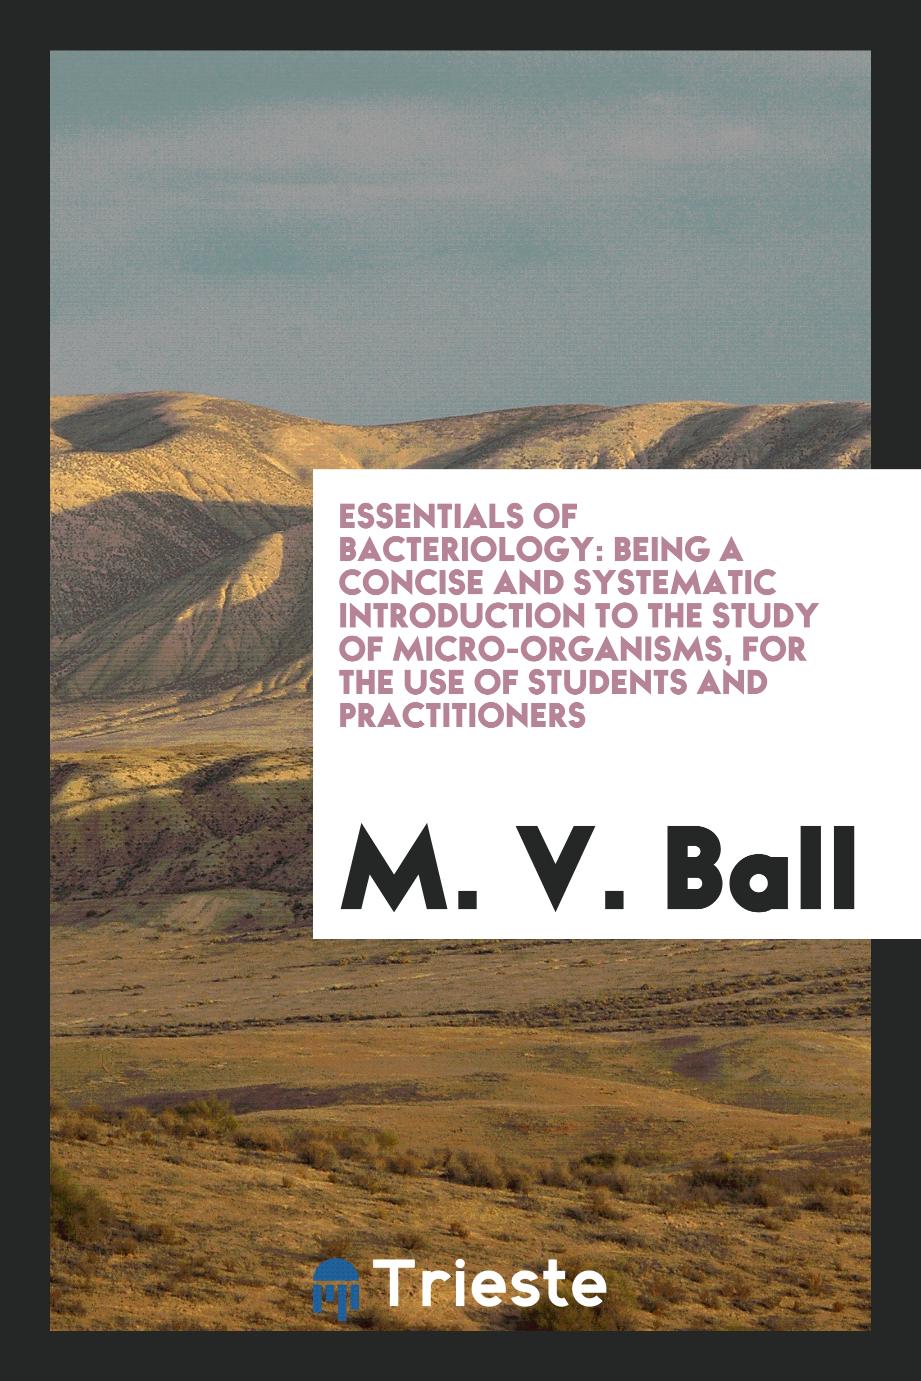 Essentials of Bacteriology: Being a Concise and Systematic Introduction to the Study of Micro-Organisms, for the Use of Students and Practitioners